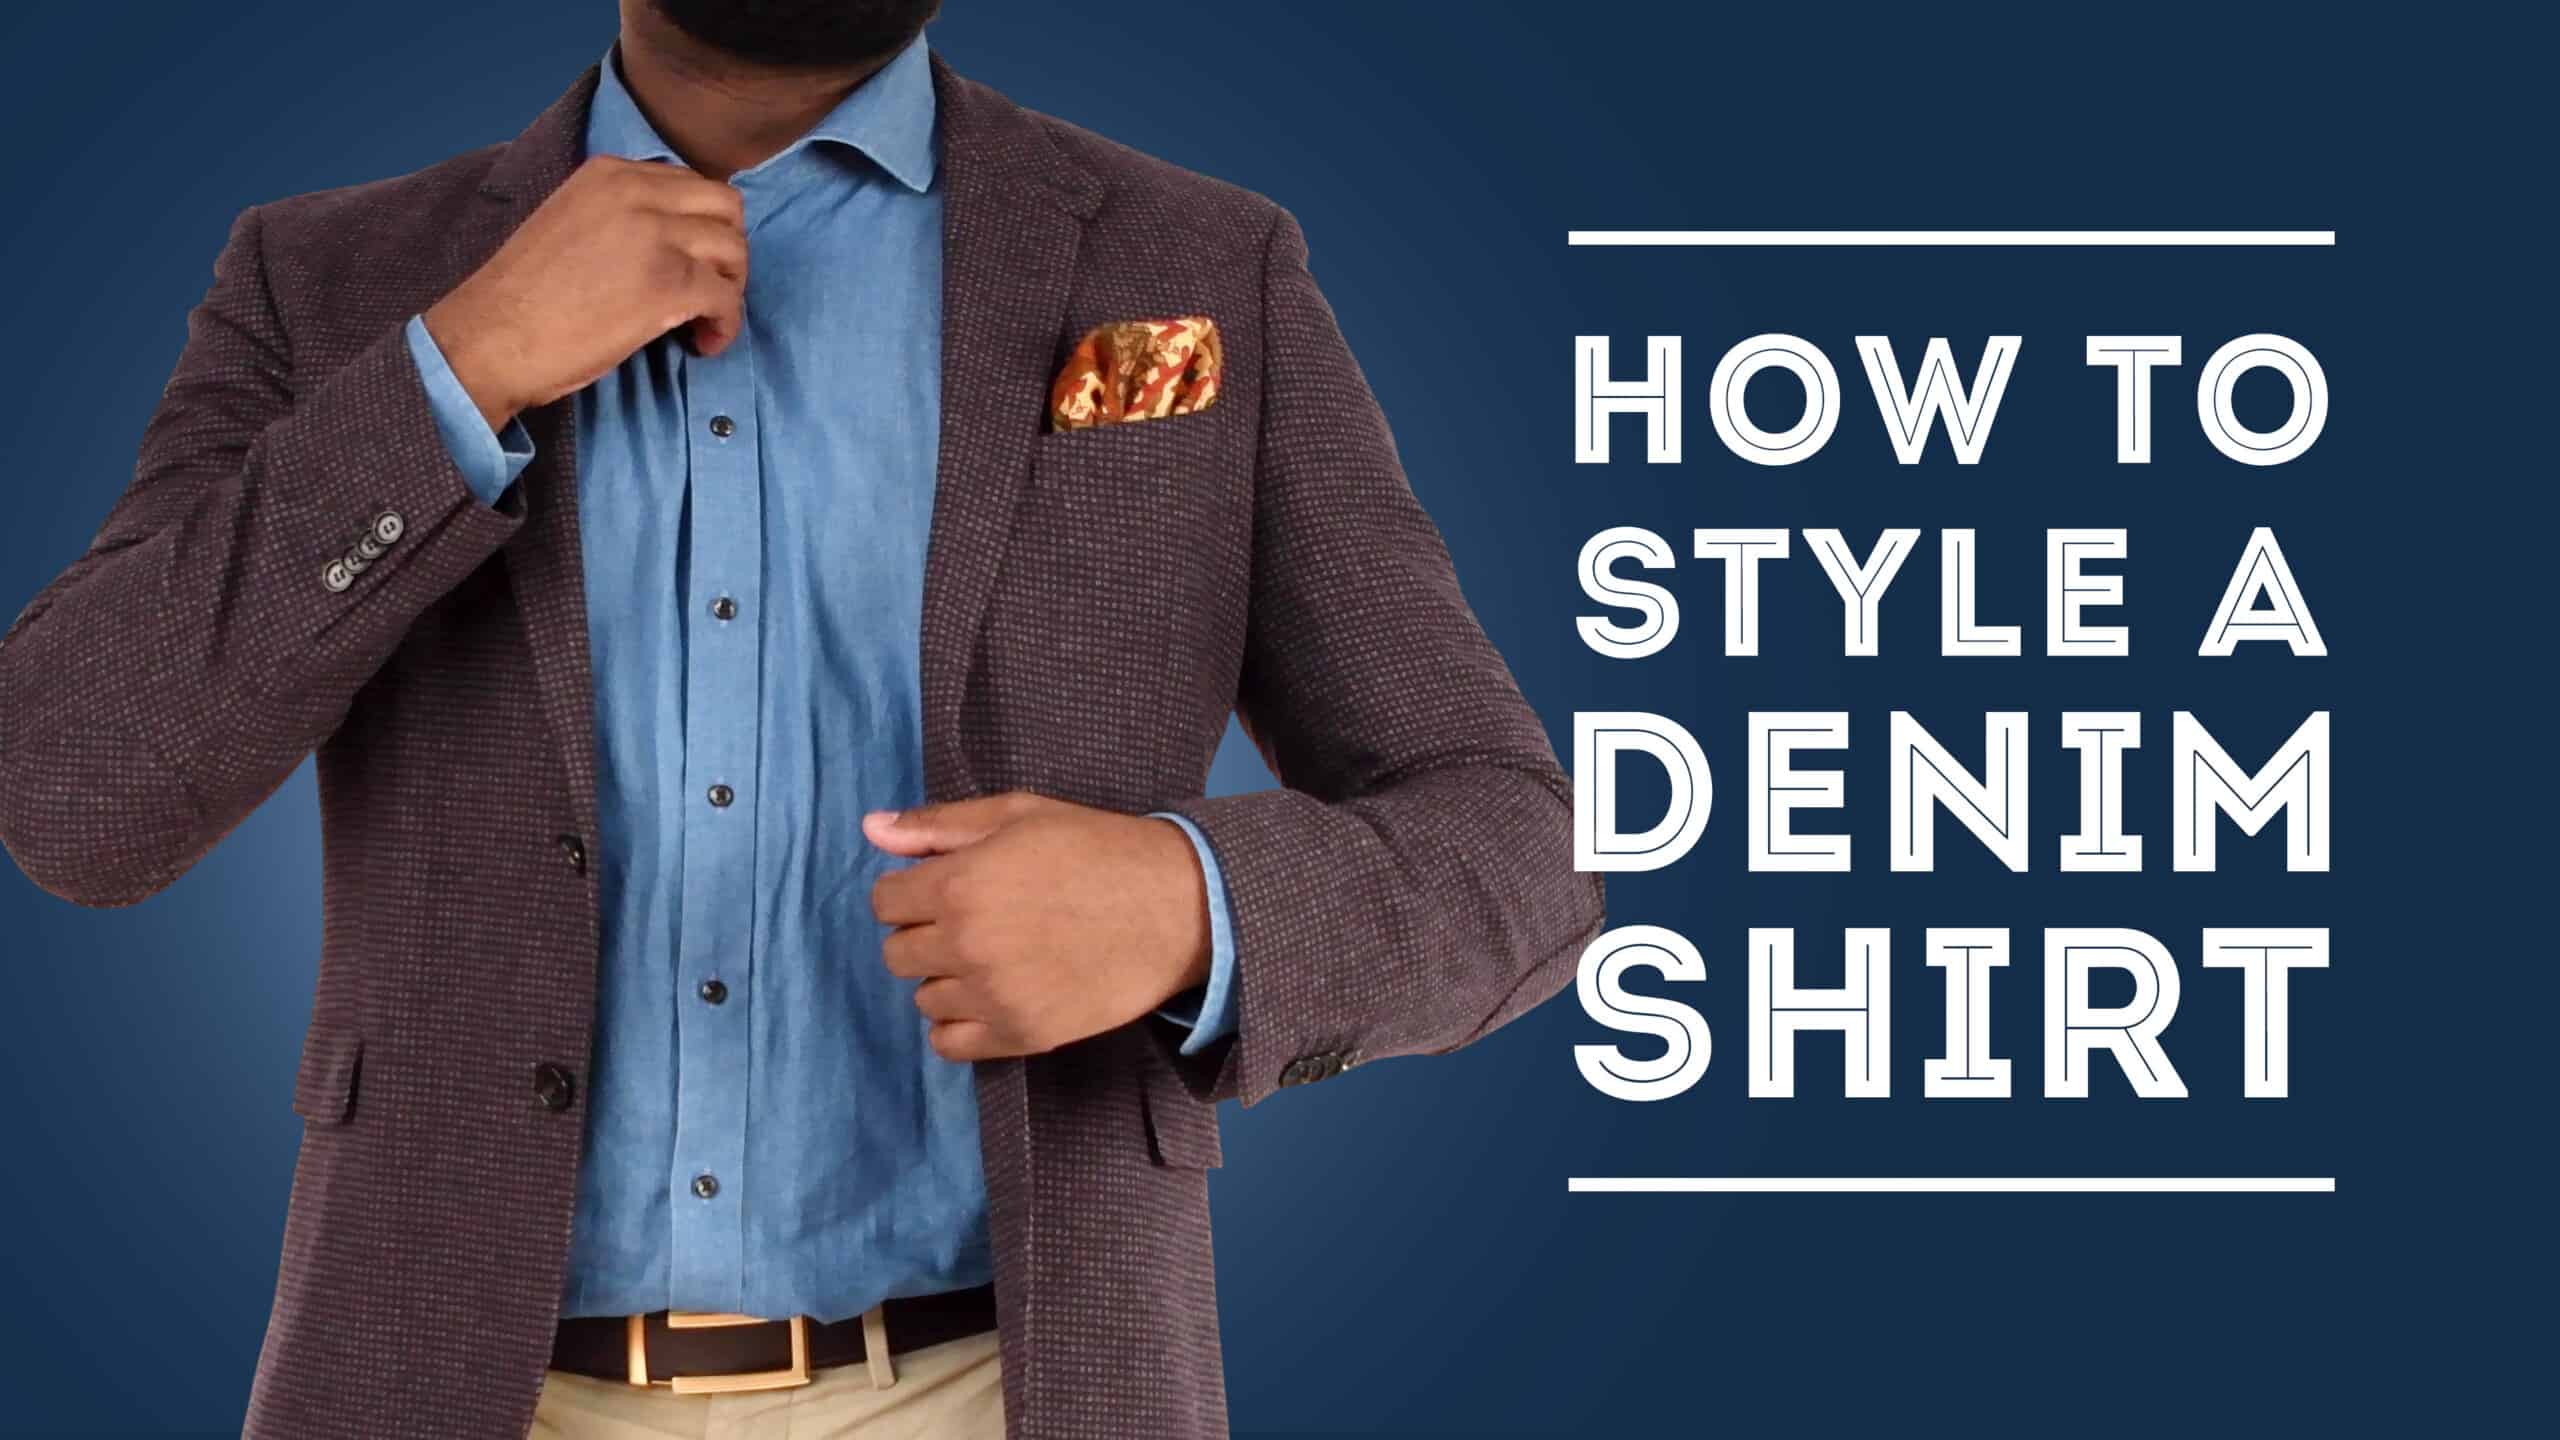 How To Style A Shirt - Outfit Ideas For Shirts